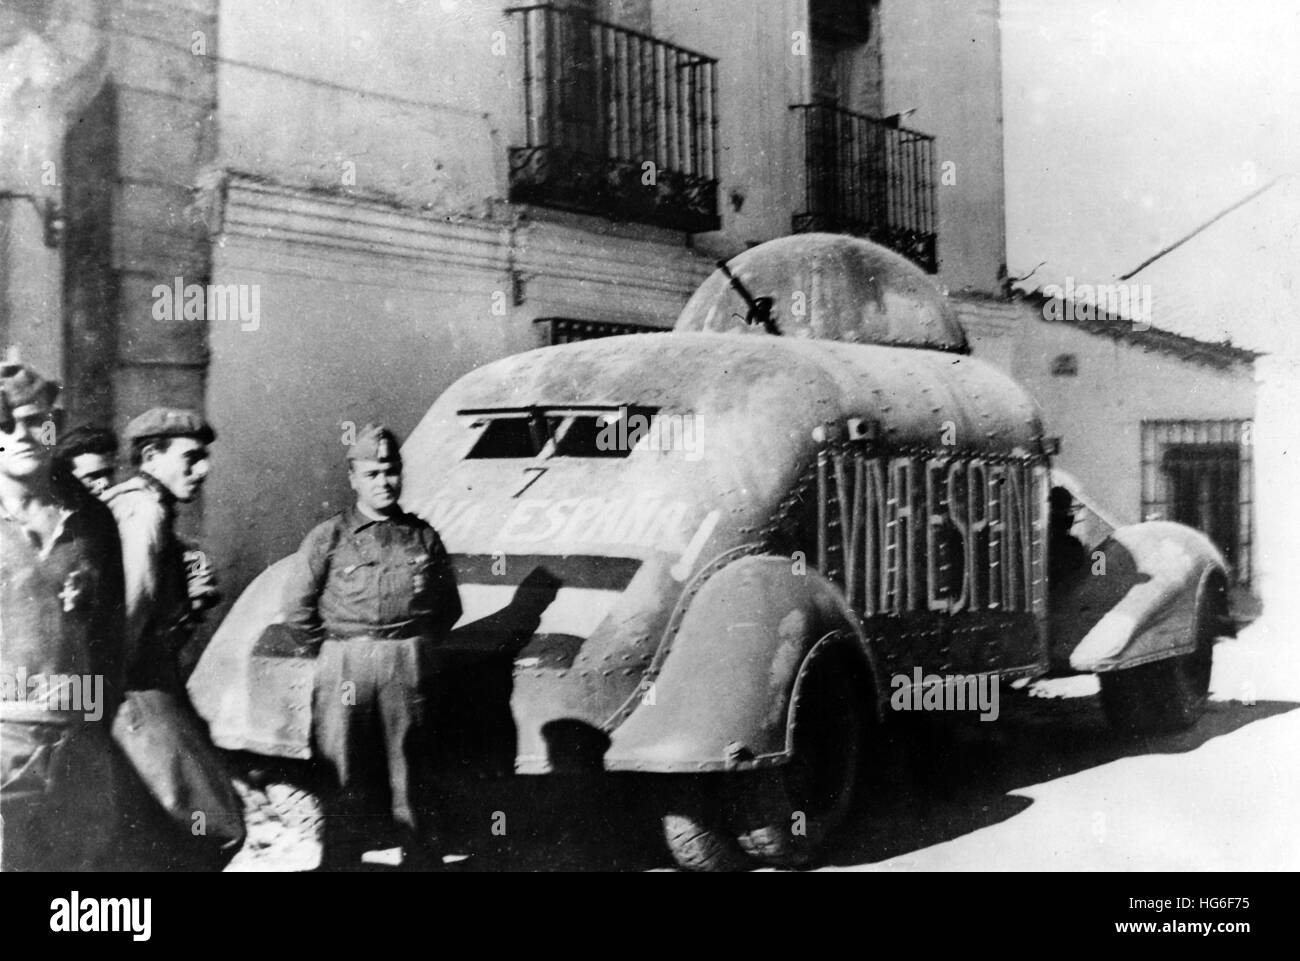 The Nazi propaganda picture shows how Francos troops occupy the city Santaner in Spain with an armored vehicle equipped with machine guns. The photo was taken in August 1937. Fotoarchiv für Zeitgeschichtee - NO WIRE SERVICE - | usage worldwide Stock Photo